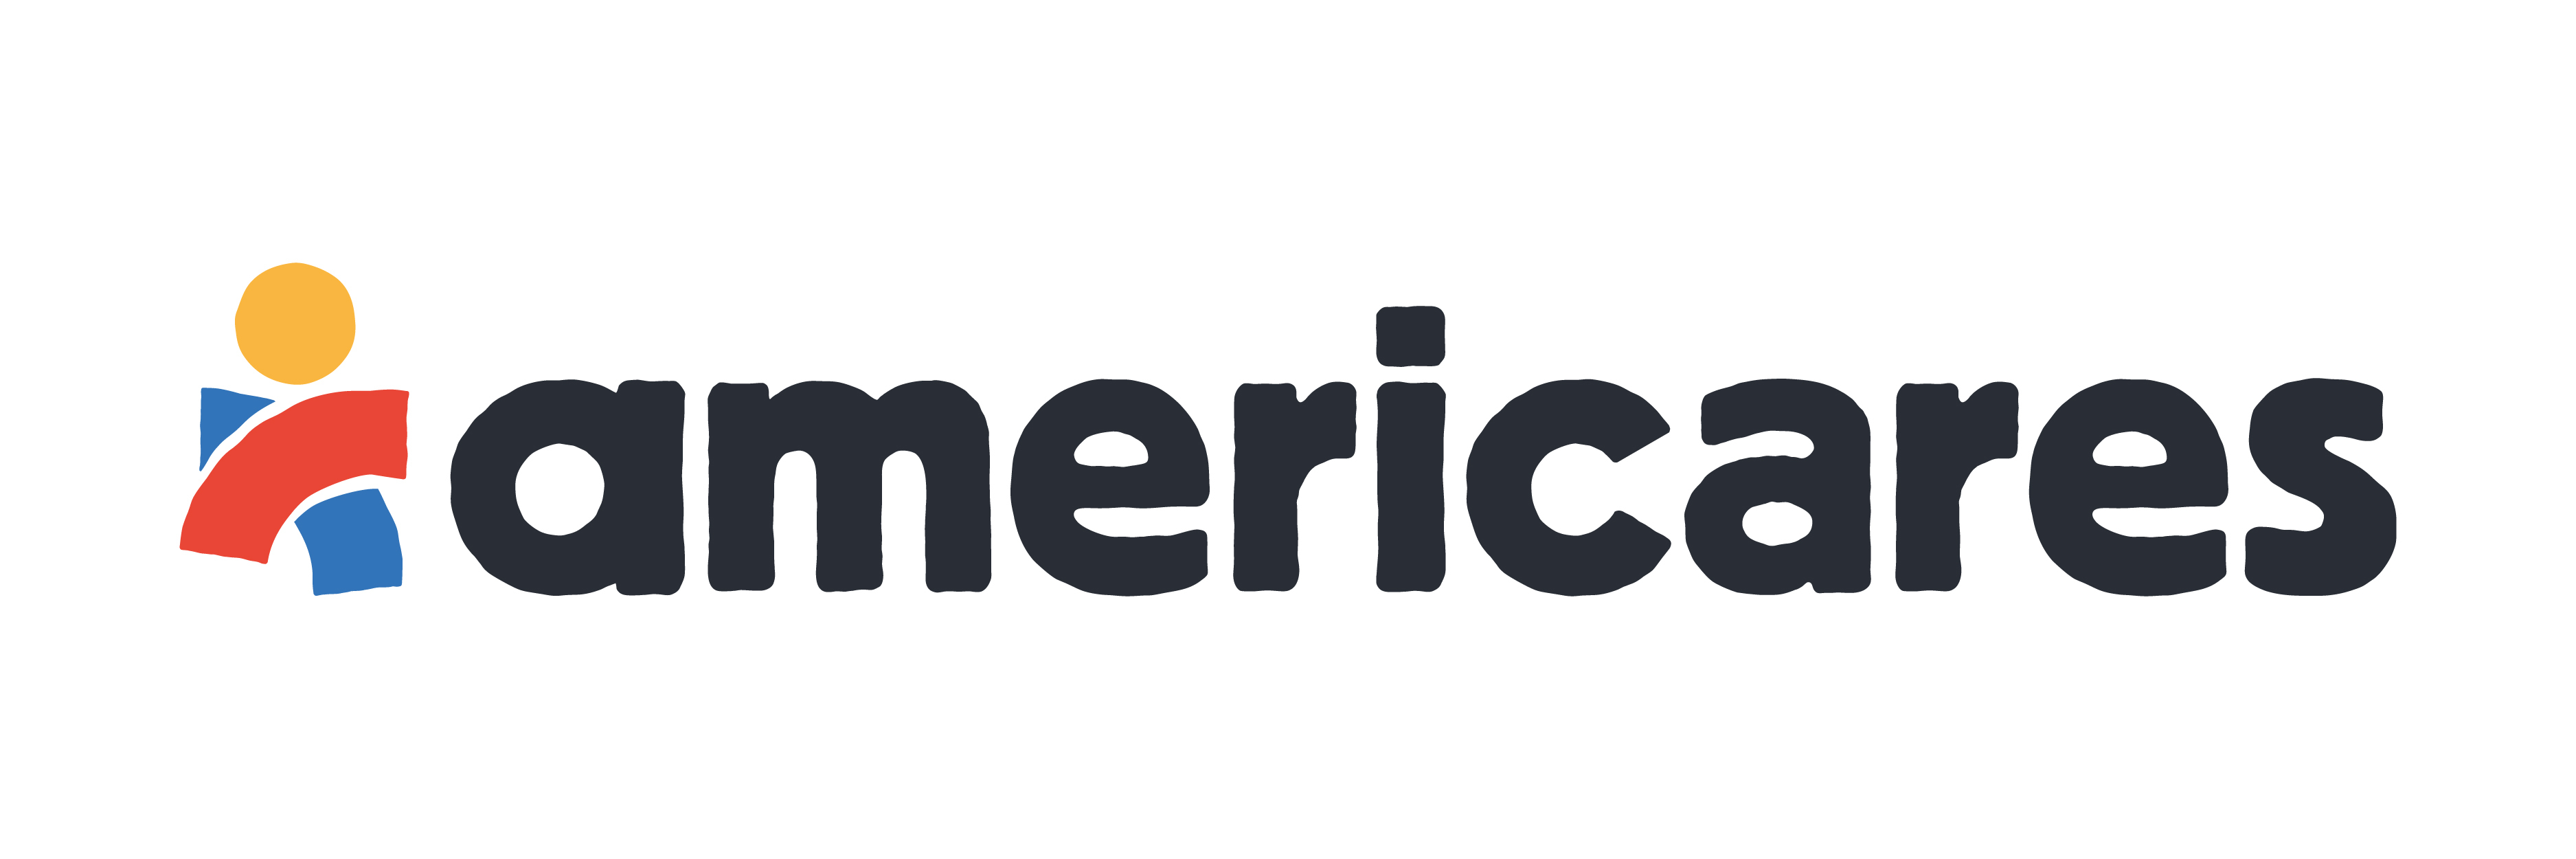 Americares Unveils New Brand Identity | Business Wire